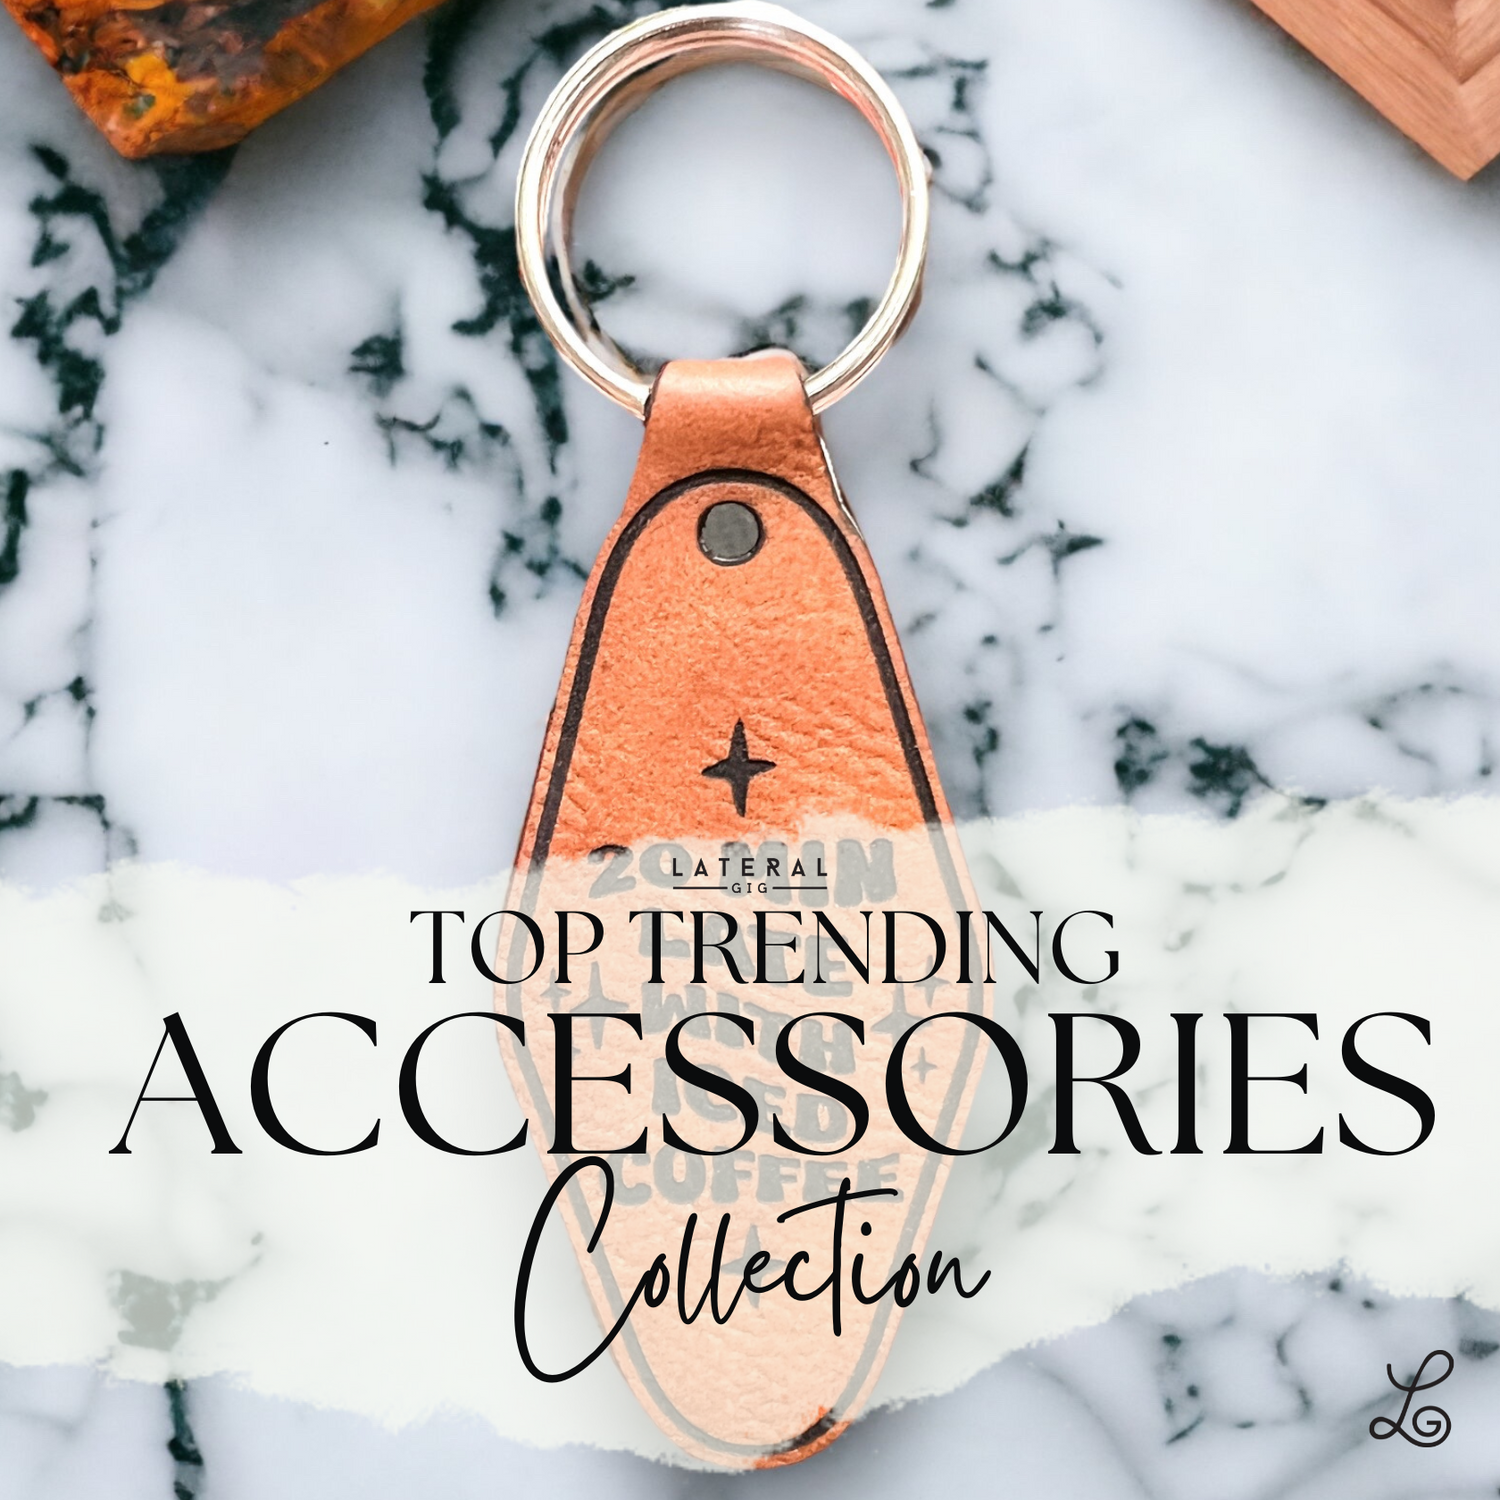 ACCESSORIES COLLECTION